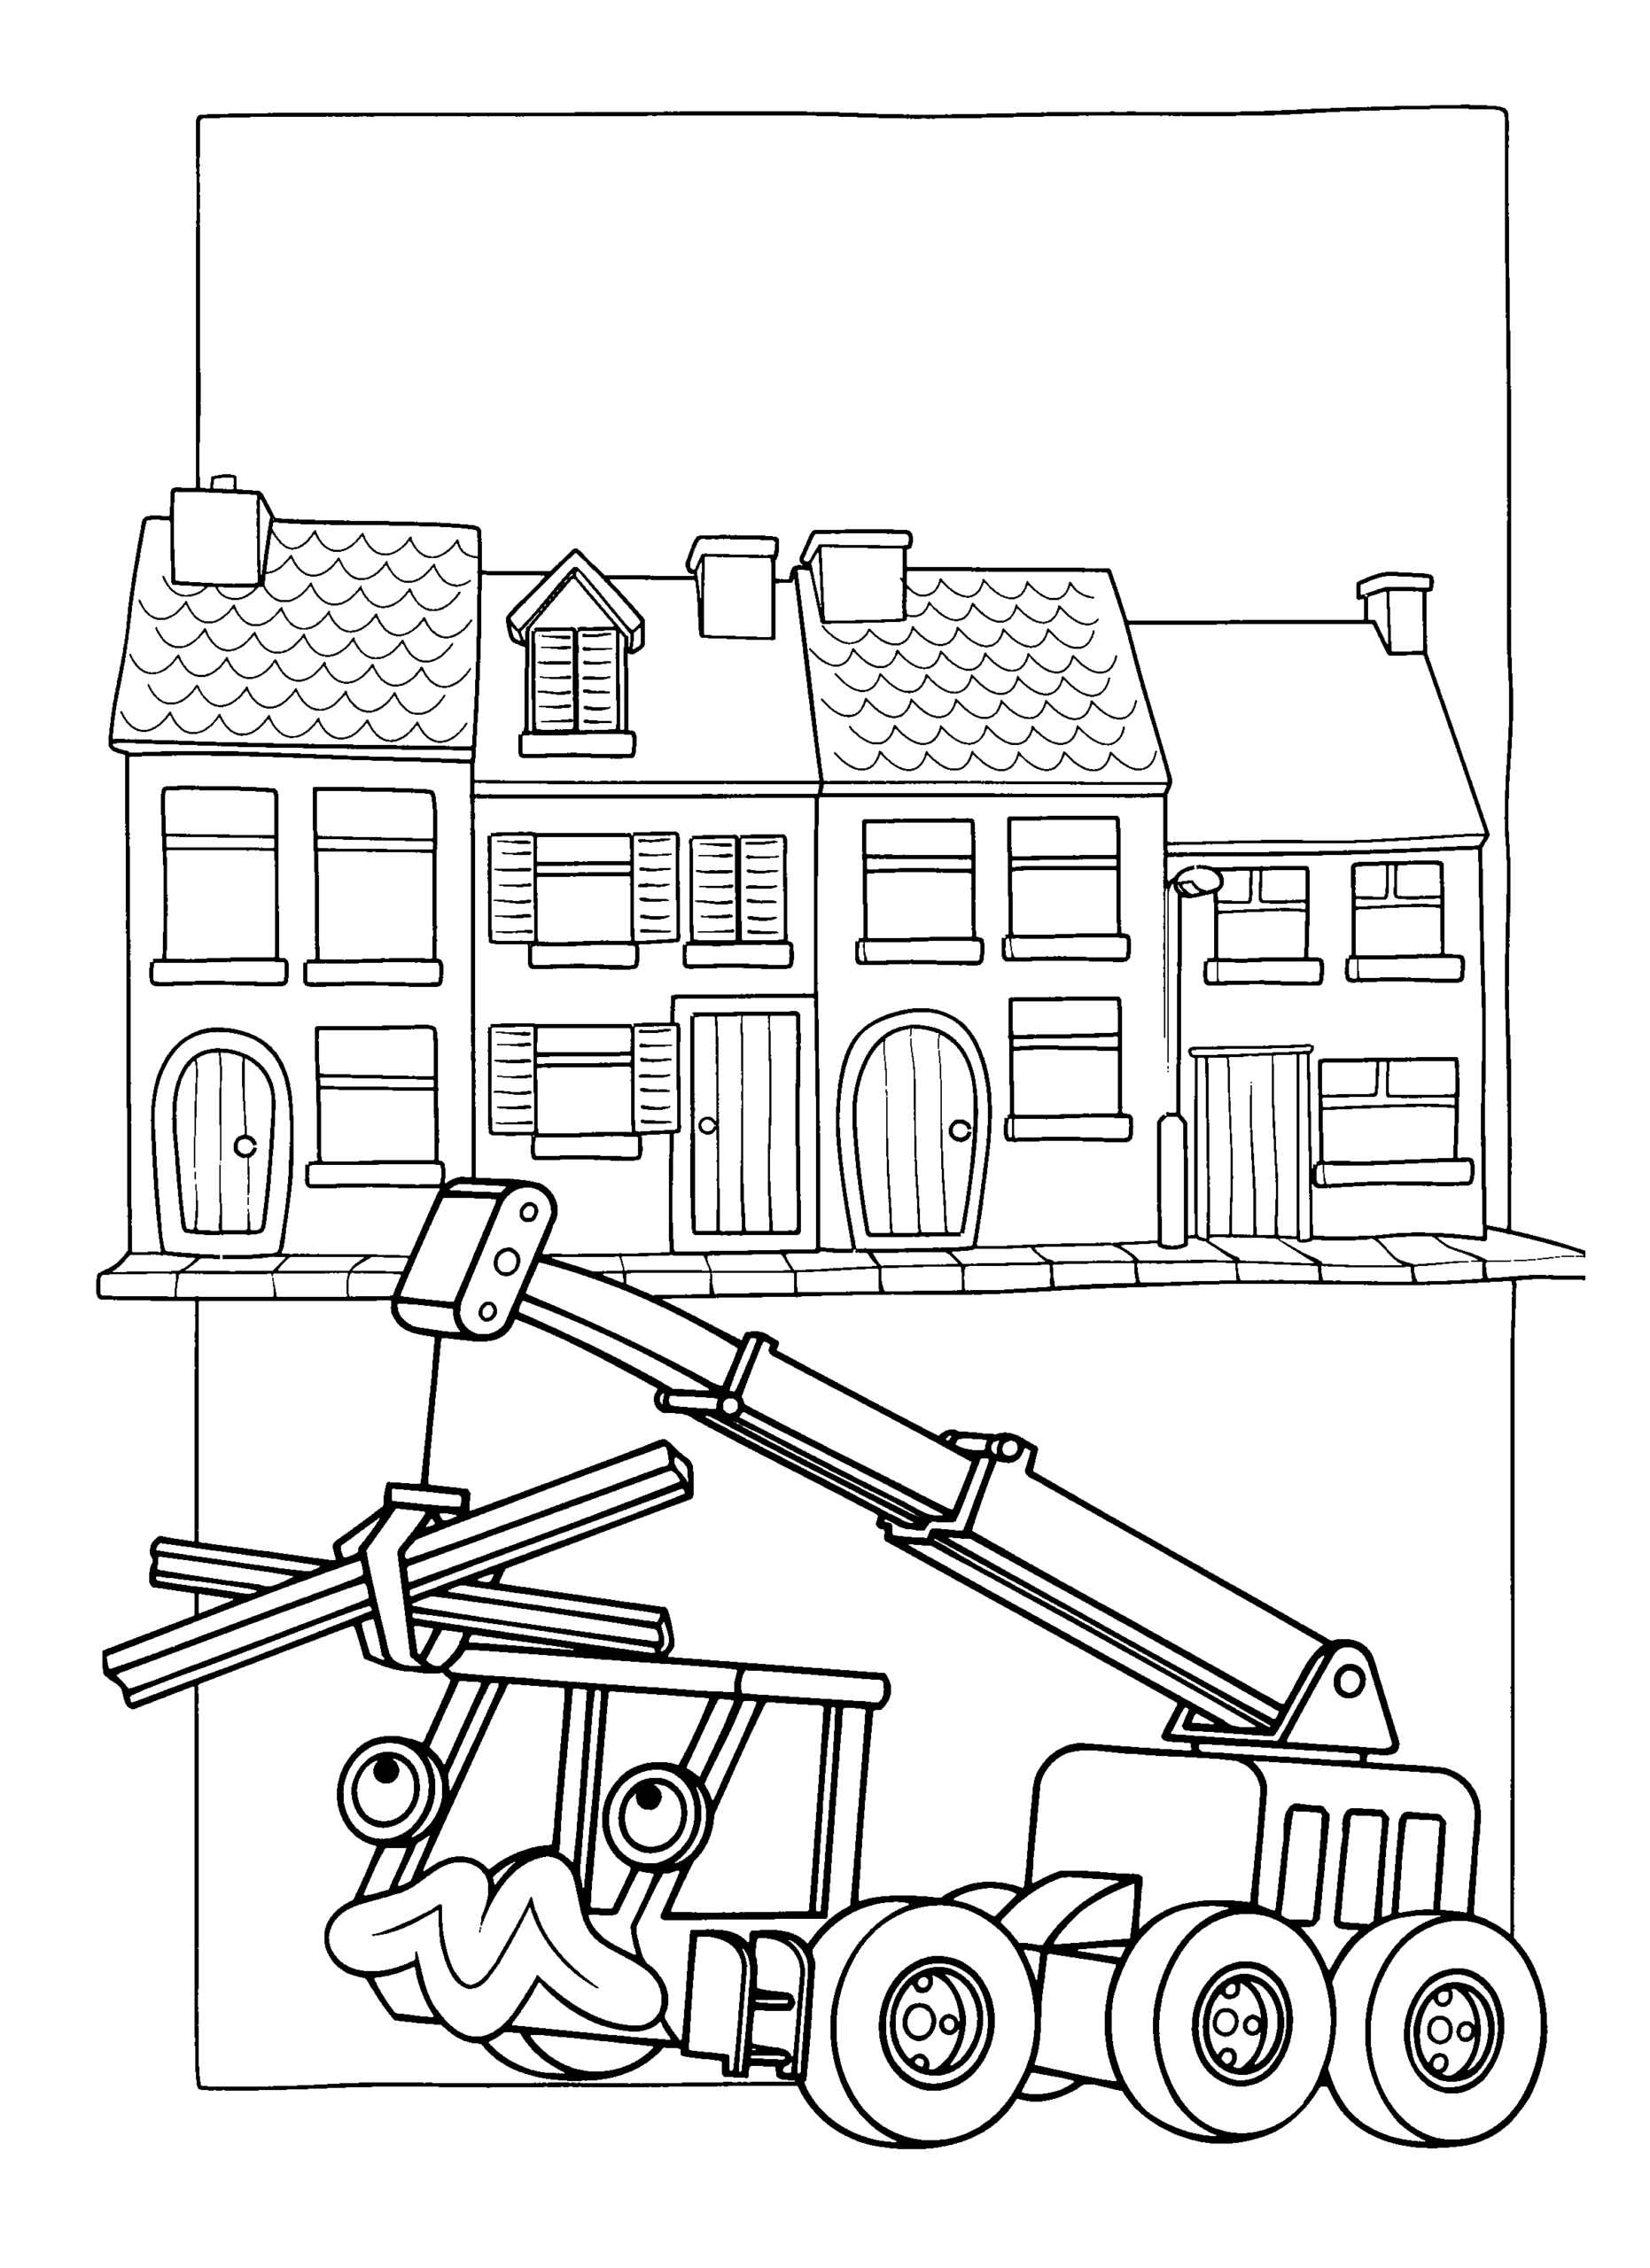 Bob the Builder Coloring Pages TV Film bob the builder 14 Printable 2020 01023 Coloring4free